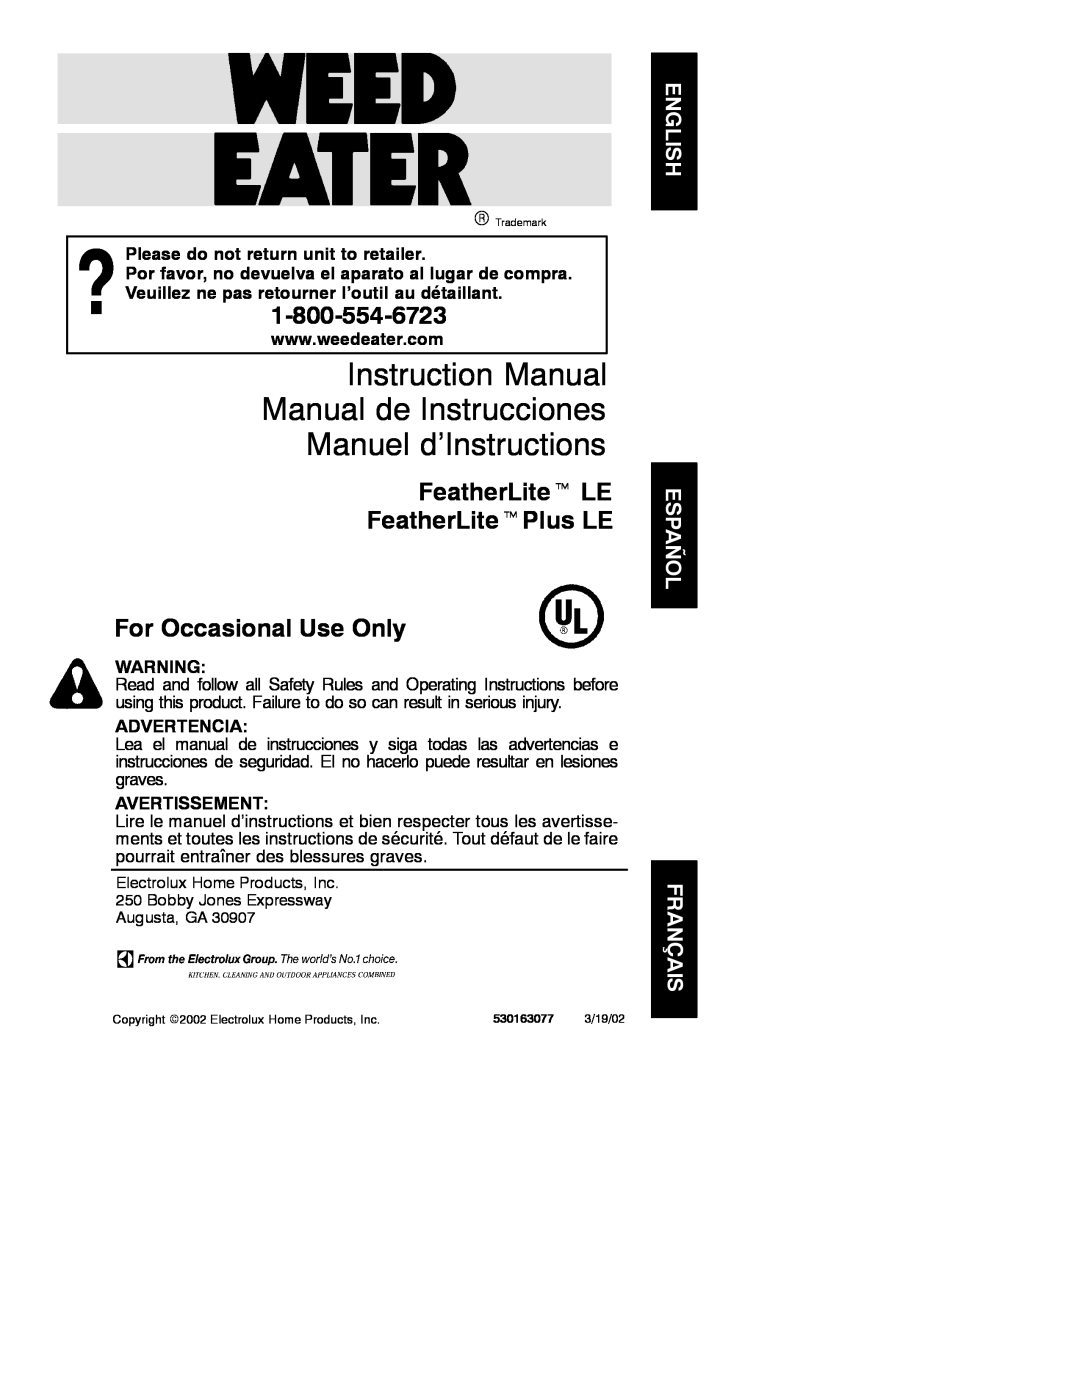 Weed Eater 530163077 instruction manual Please do not return unit to retailer, Advertencia, Avertissement 